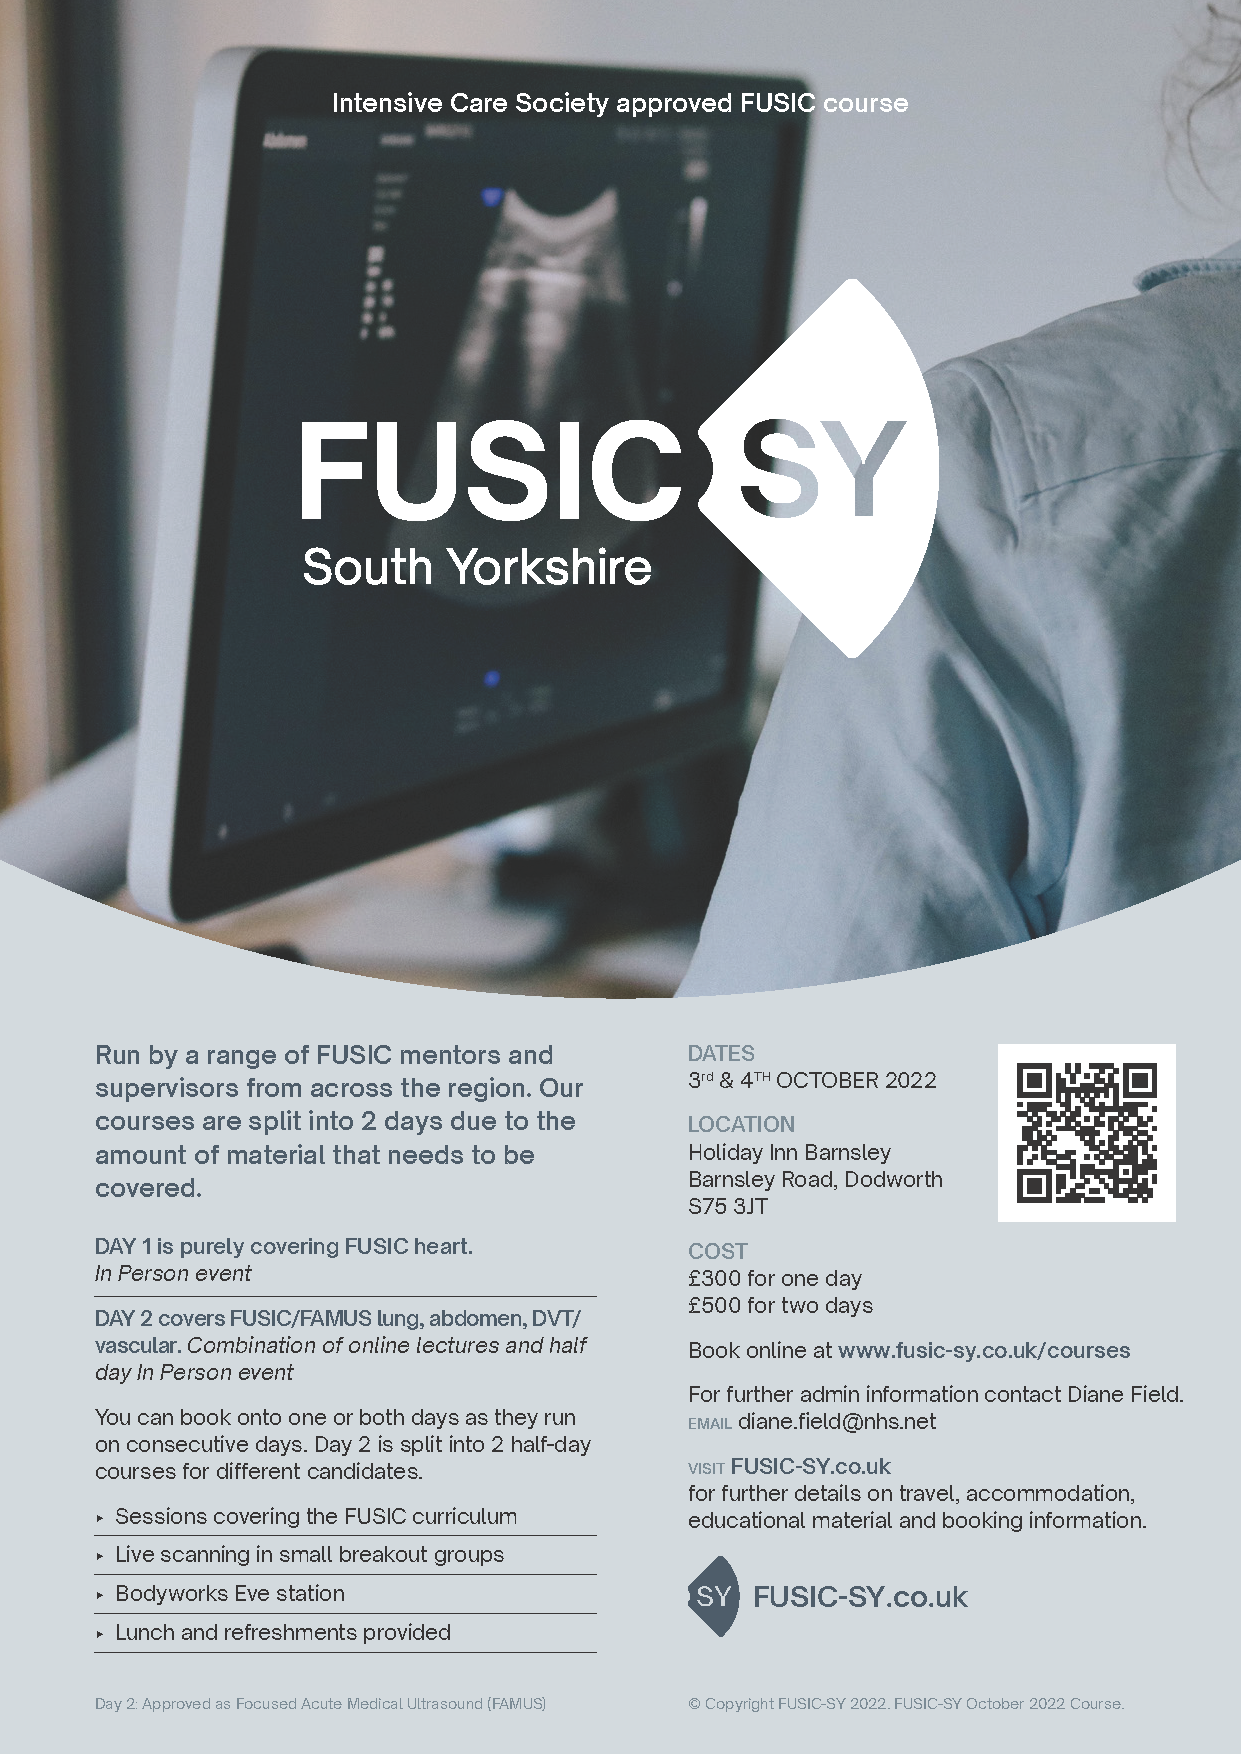 fusic-sy-a4-course-poster-october-2022-v2.png